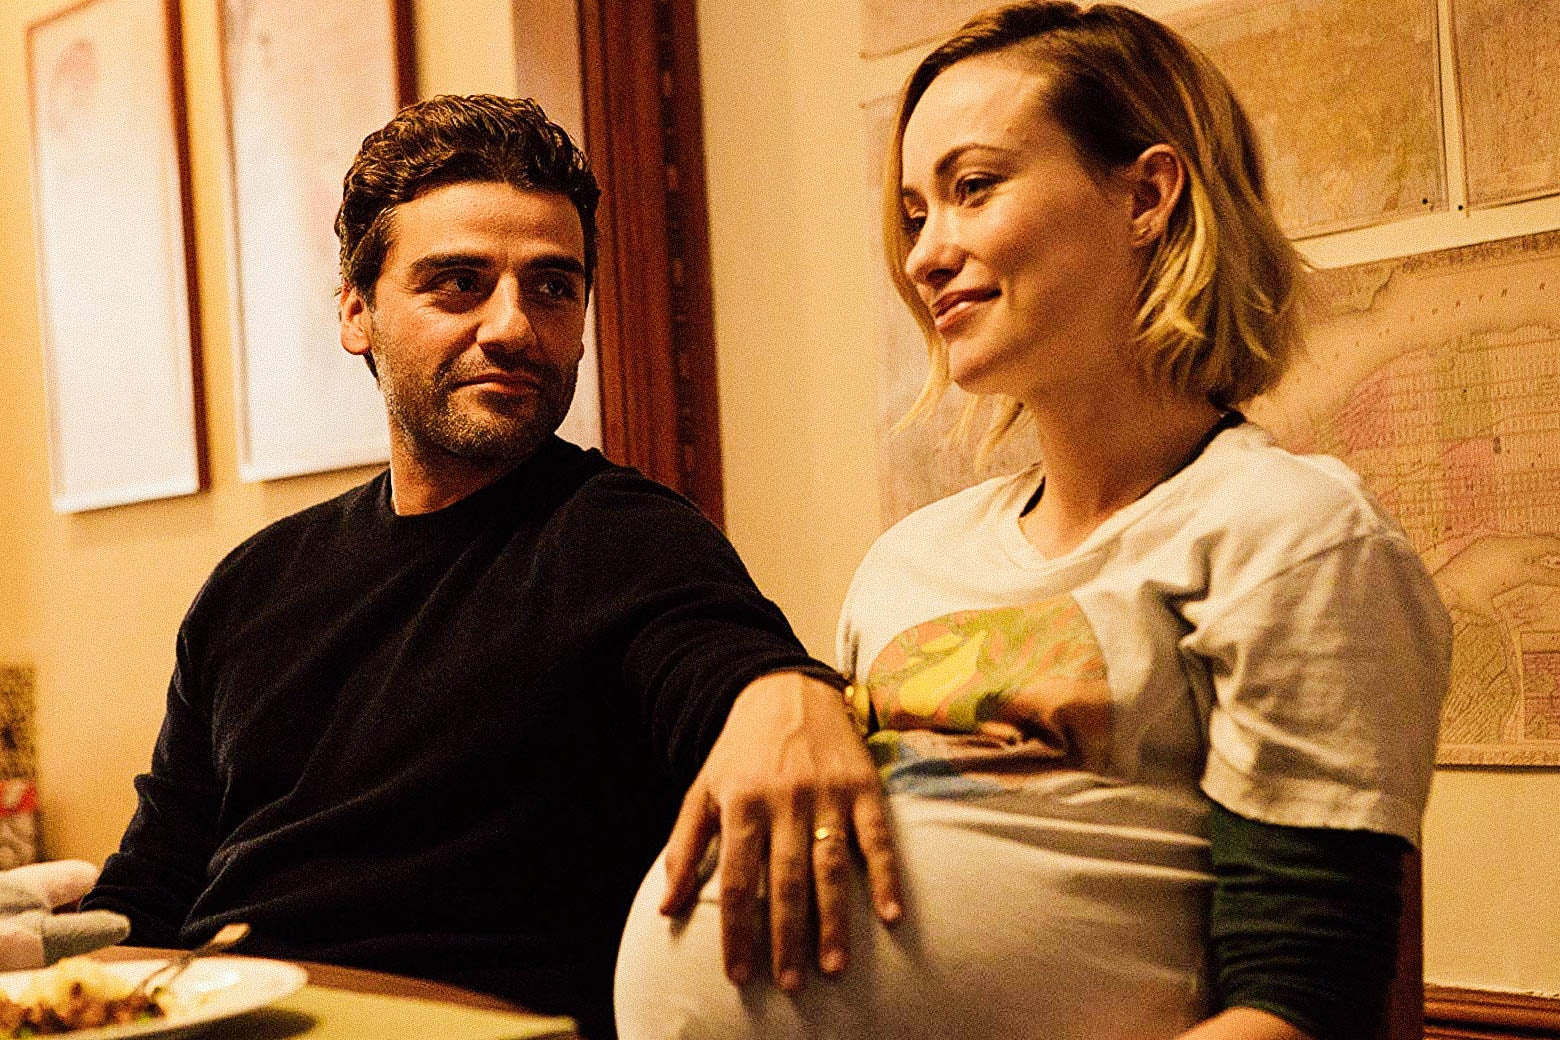 Oscar Isaac’s character rests his arm on the pregnant belly of Olivia Wilde’s character.